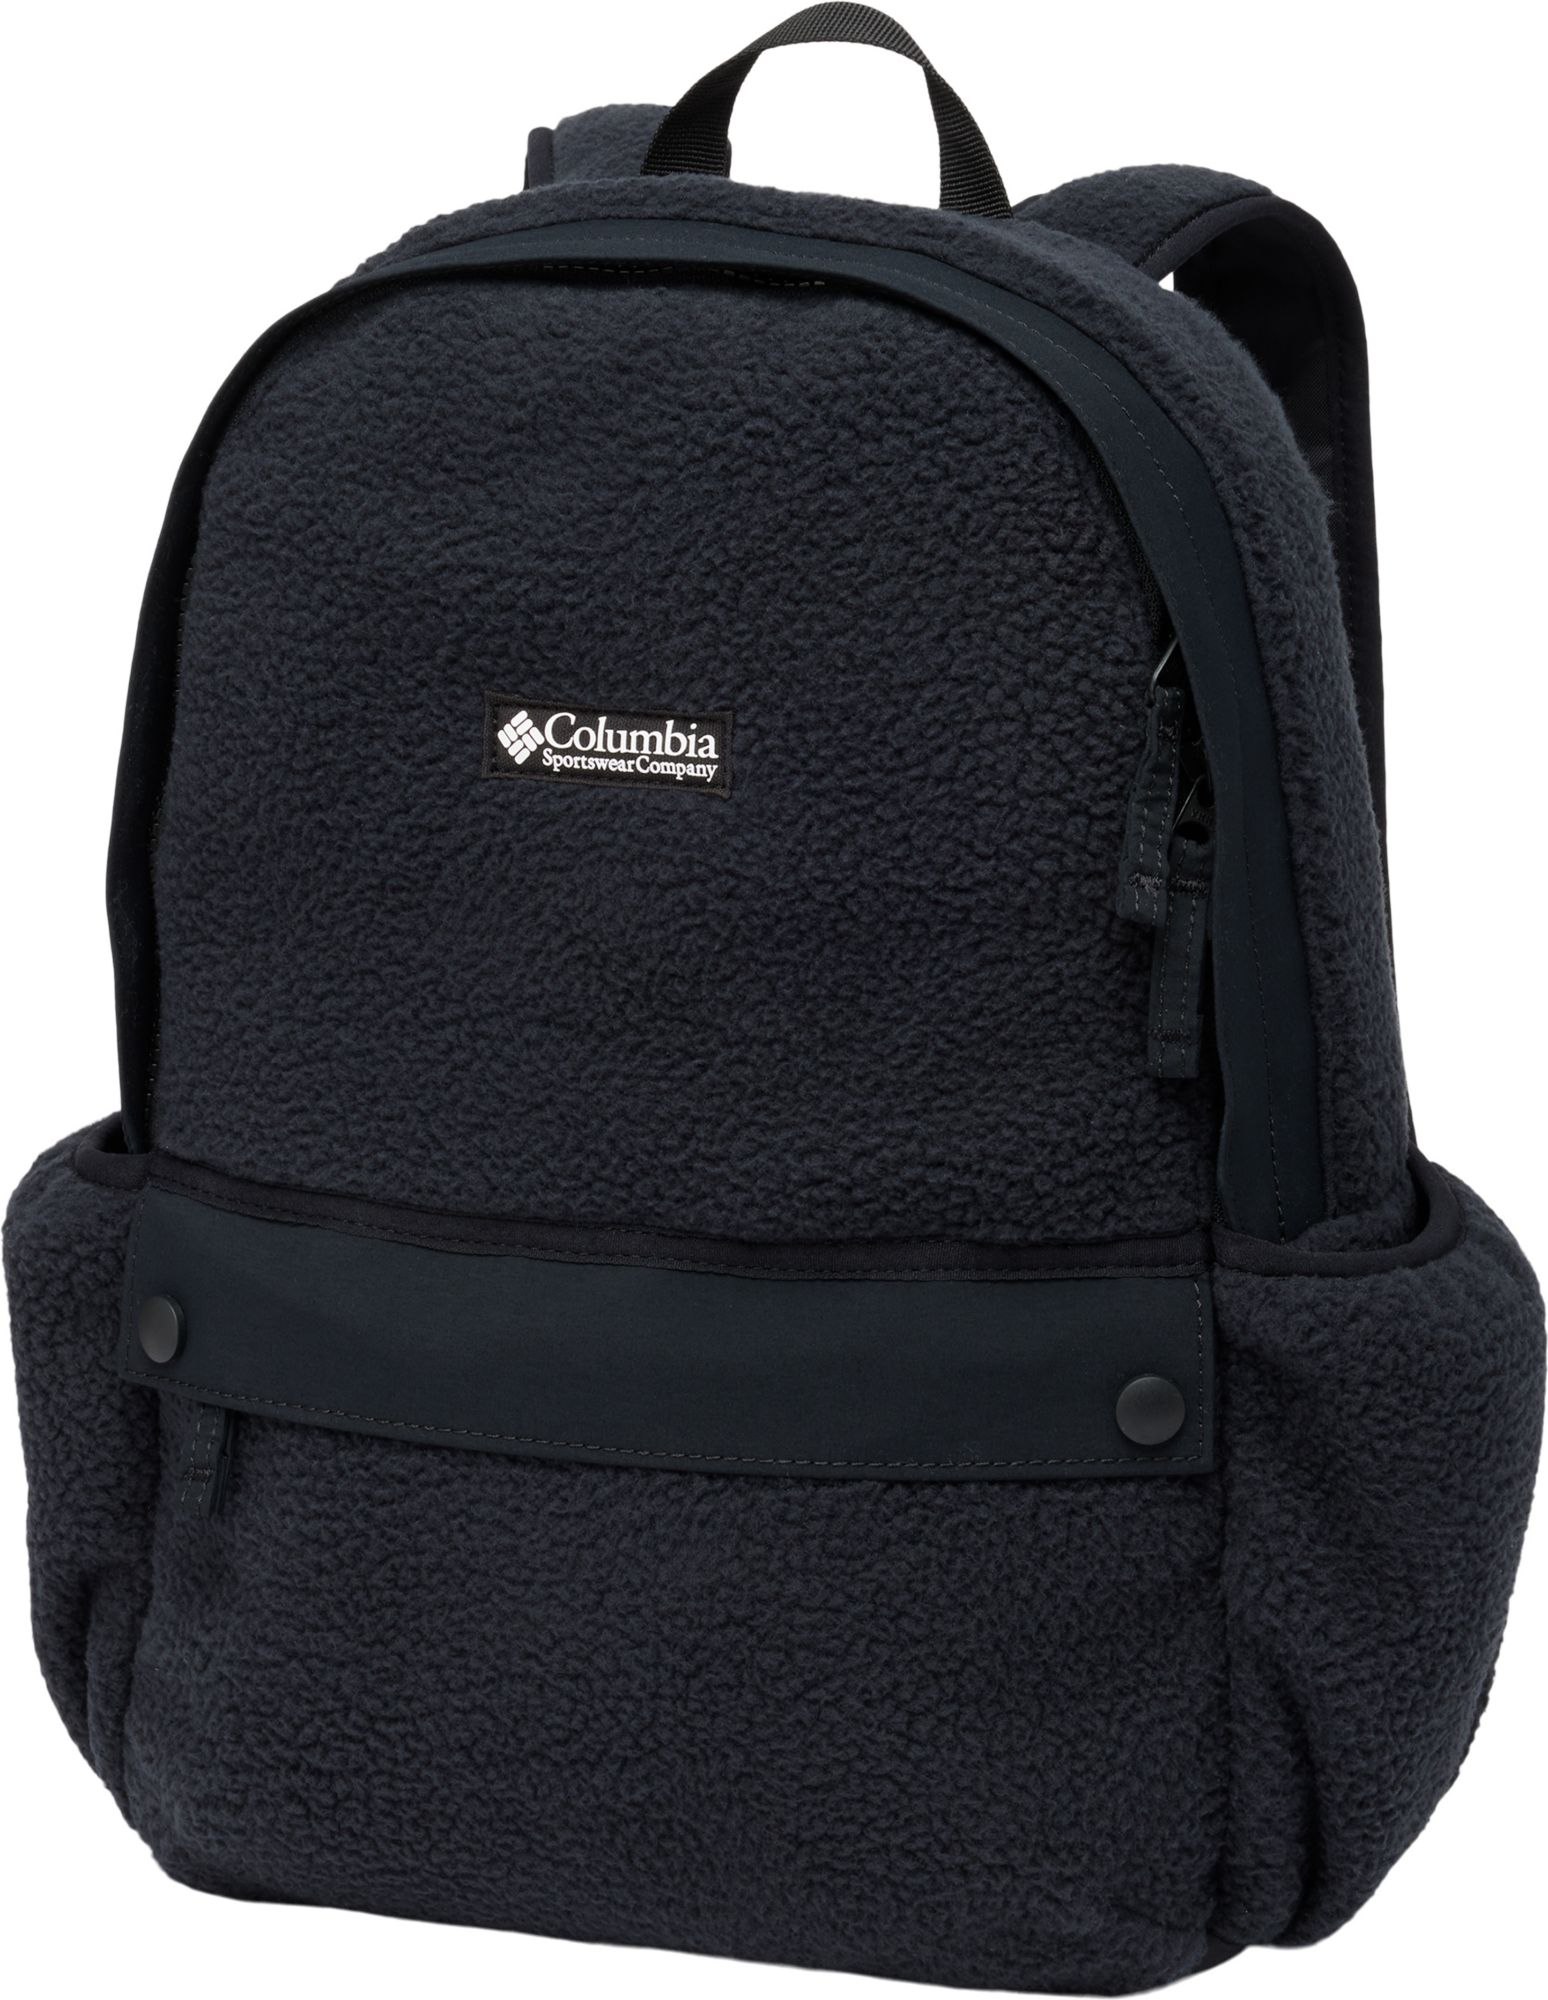 Photos - Backpack Columbia Women's Helvetia 14L , Black | Mother’s Day Gift 23CMBWWH 